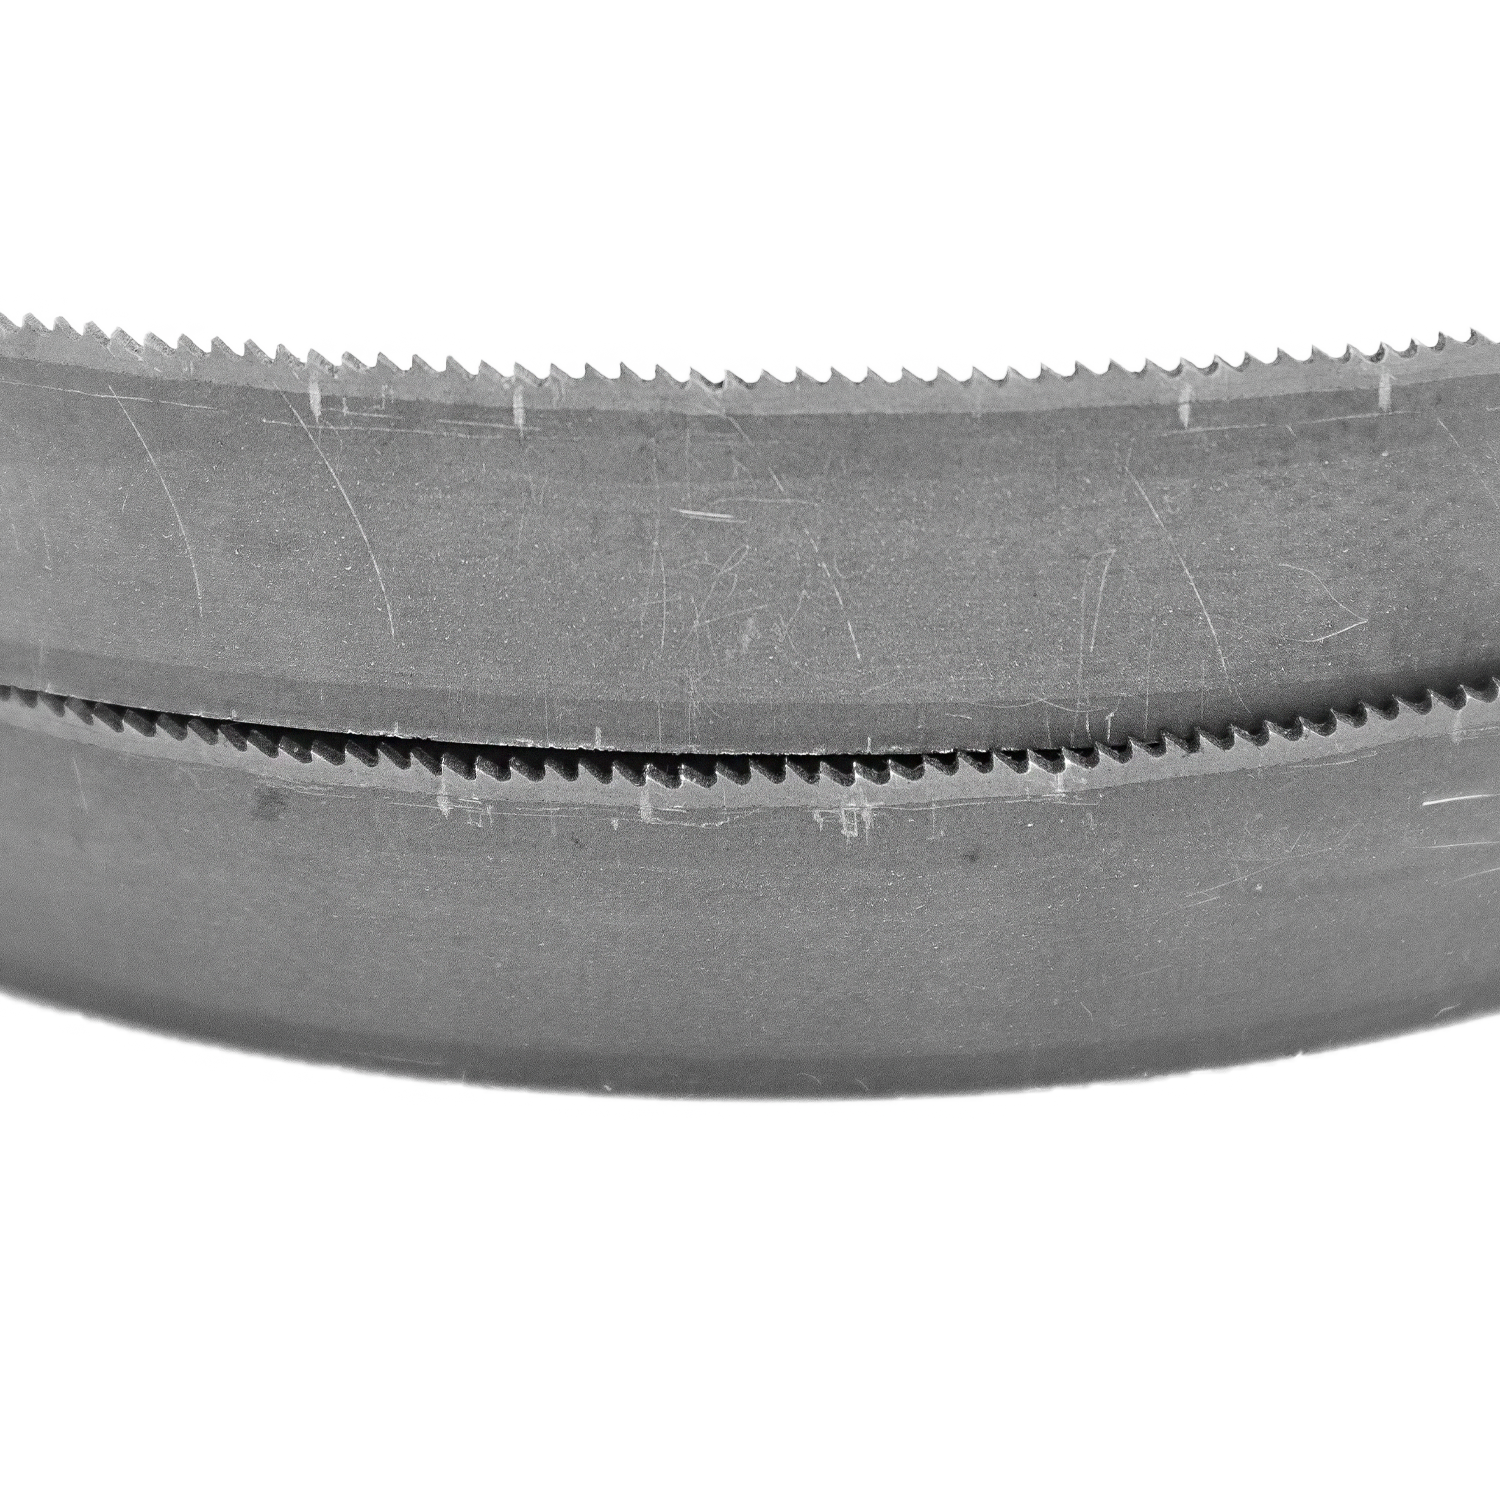 Pipeworker band saw blade 733.00mm